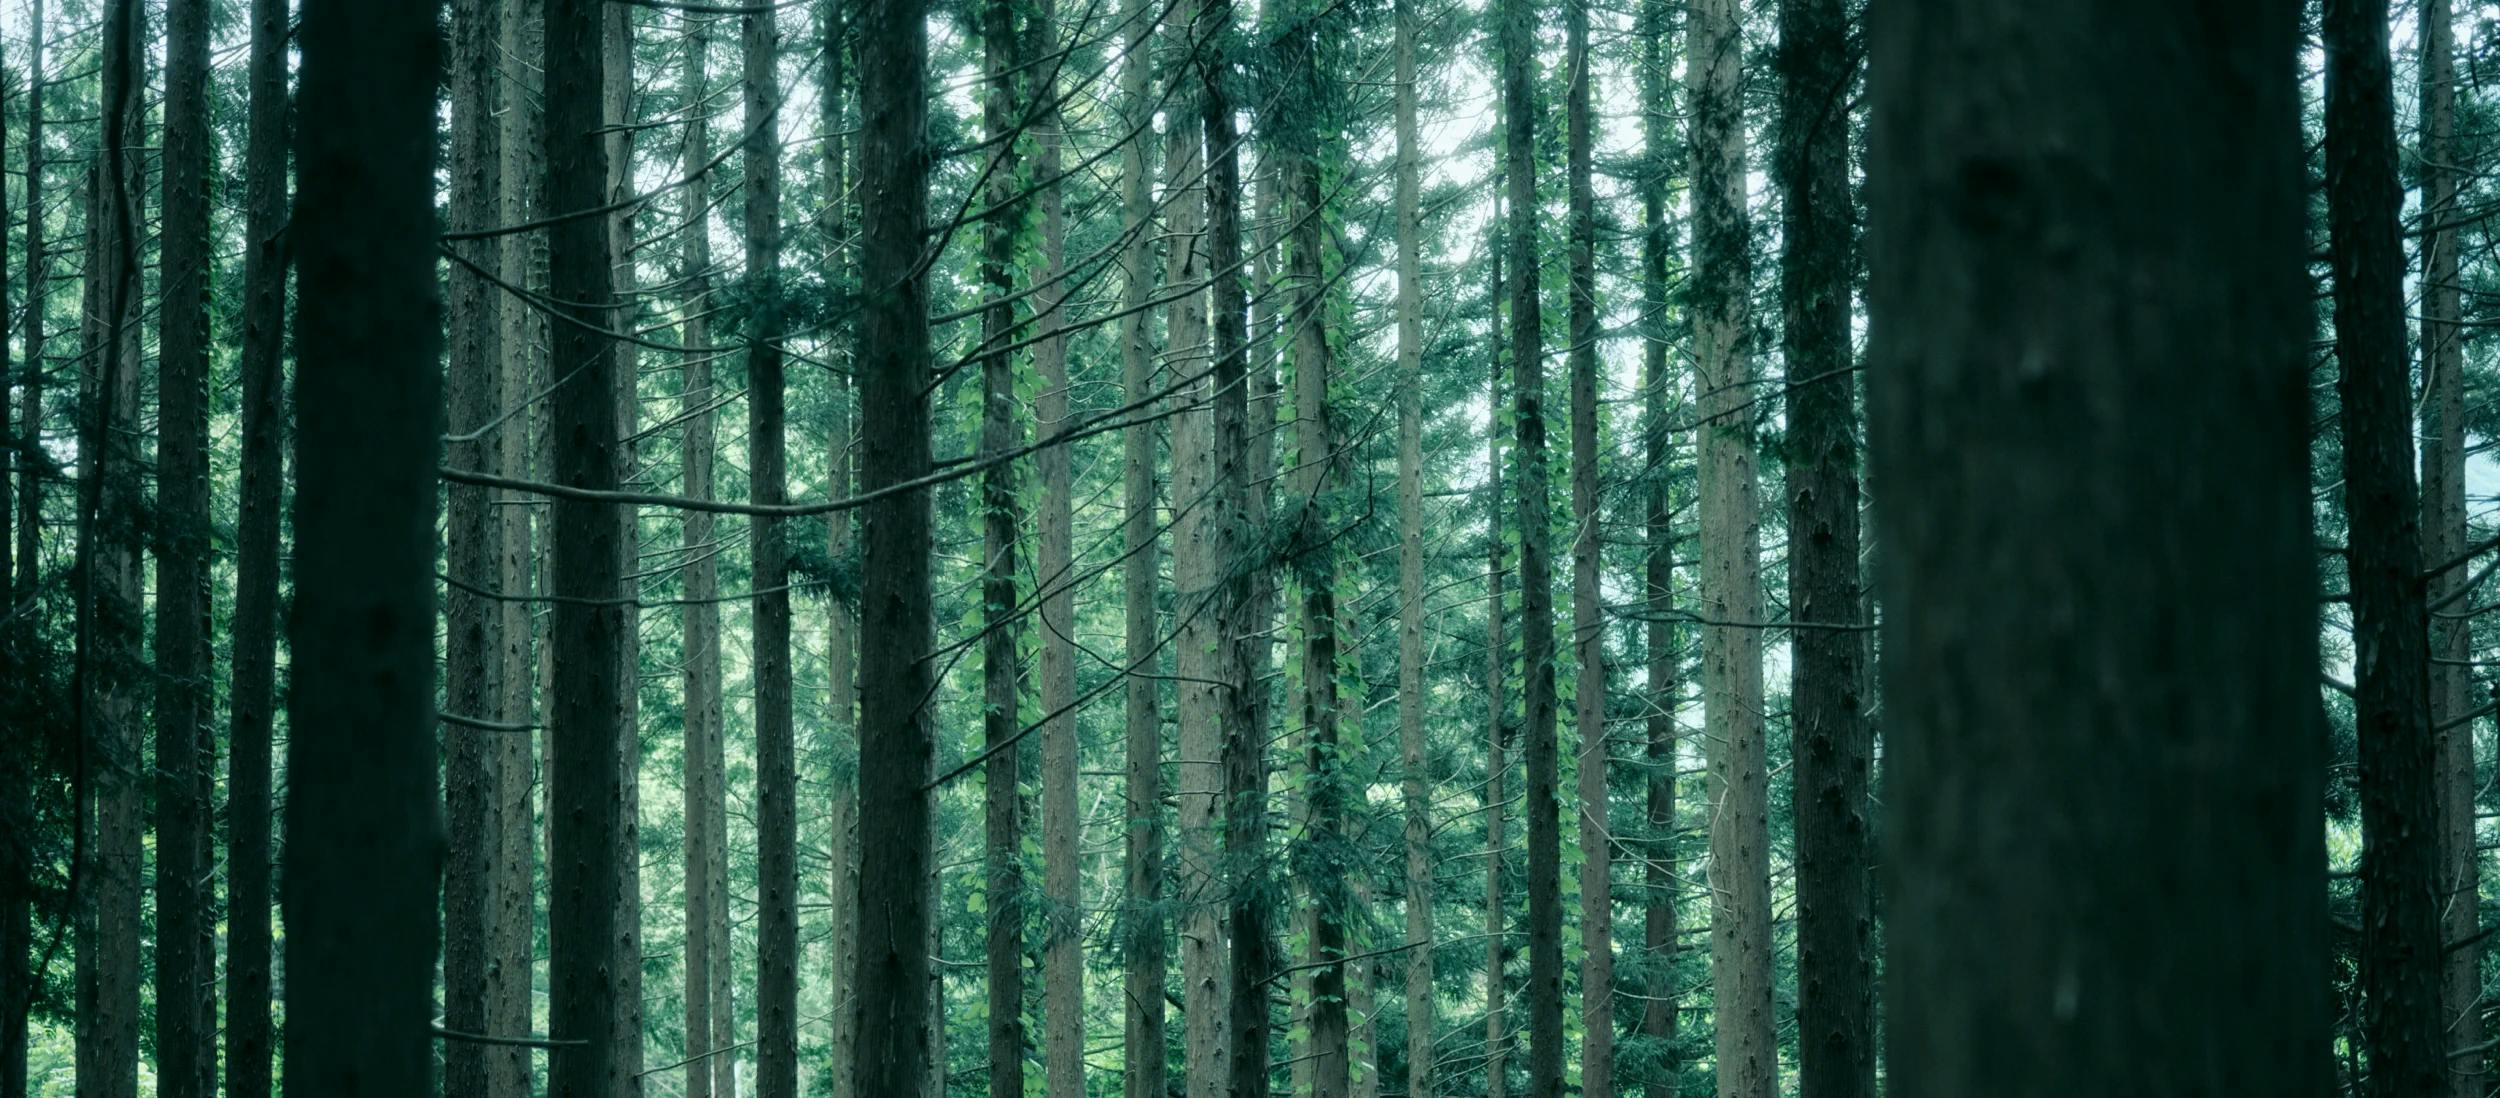 A picture of a forest in Nagano, Japan.